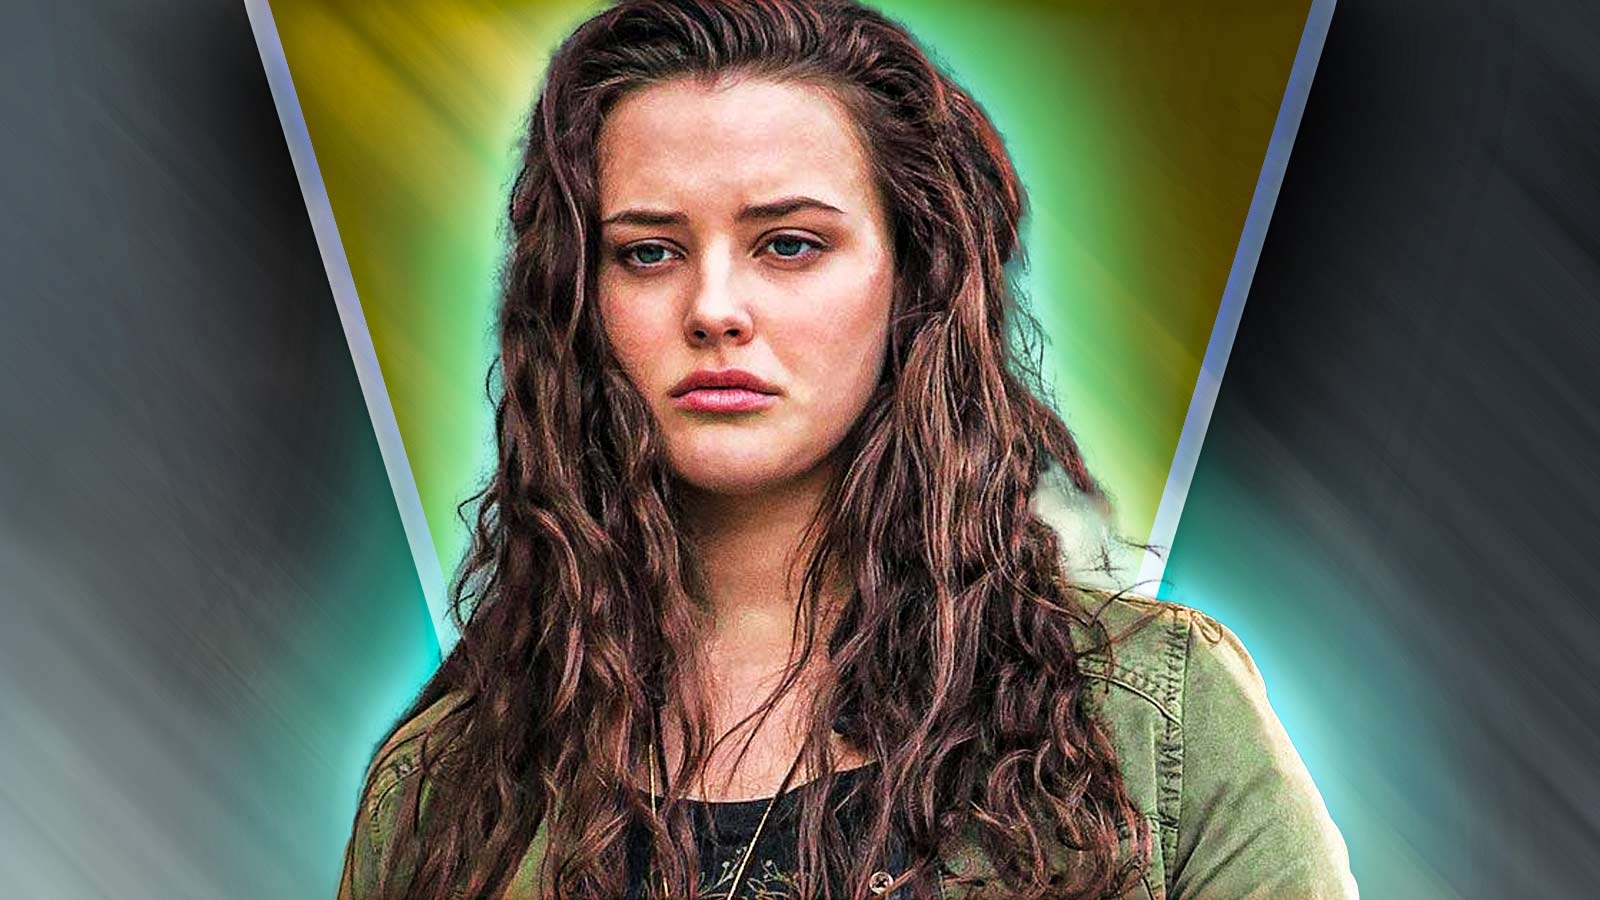 “Comeback is gonna be huge”: 13 Reasons Why Star Katherine Langford is Stepping into an Entirely New Role For Next Project ‘The Loneliest Girl in the Universe’